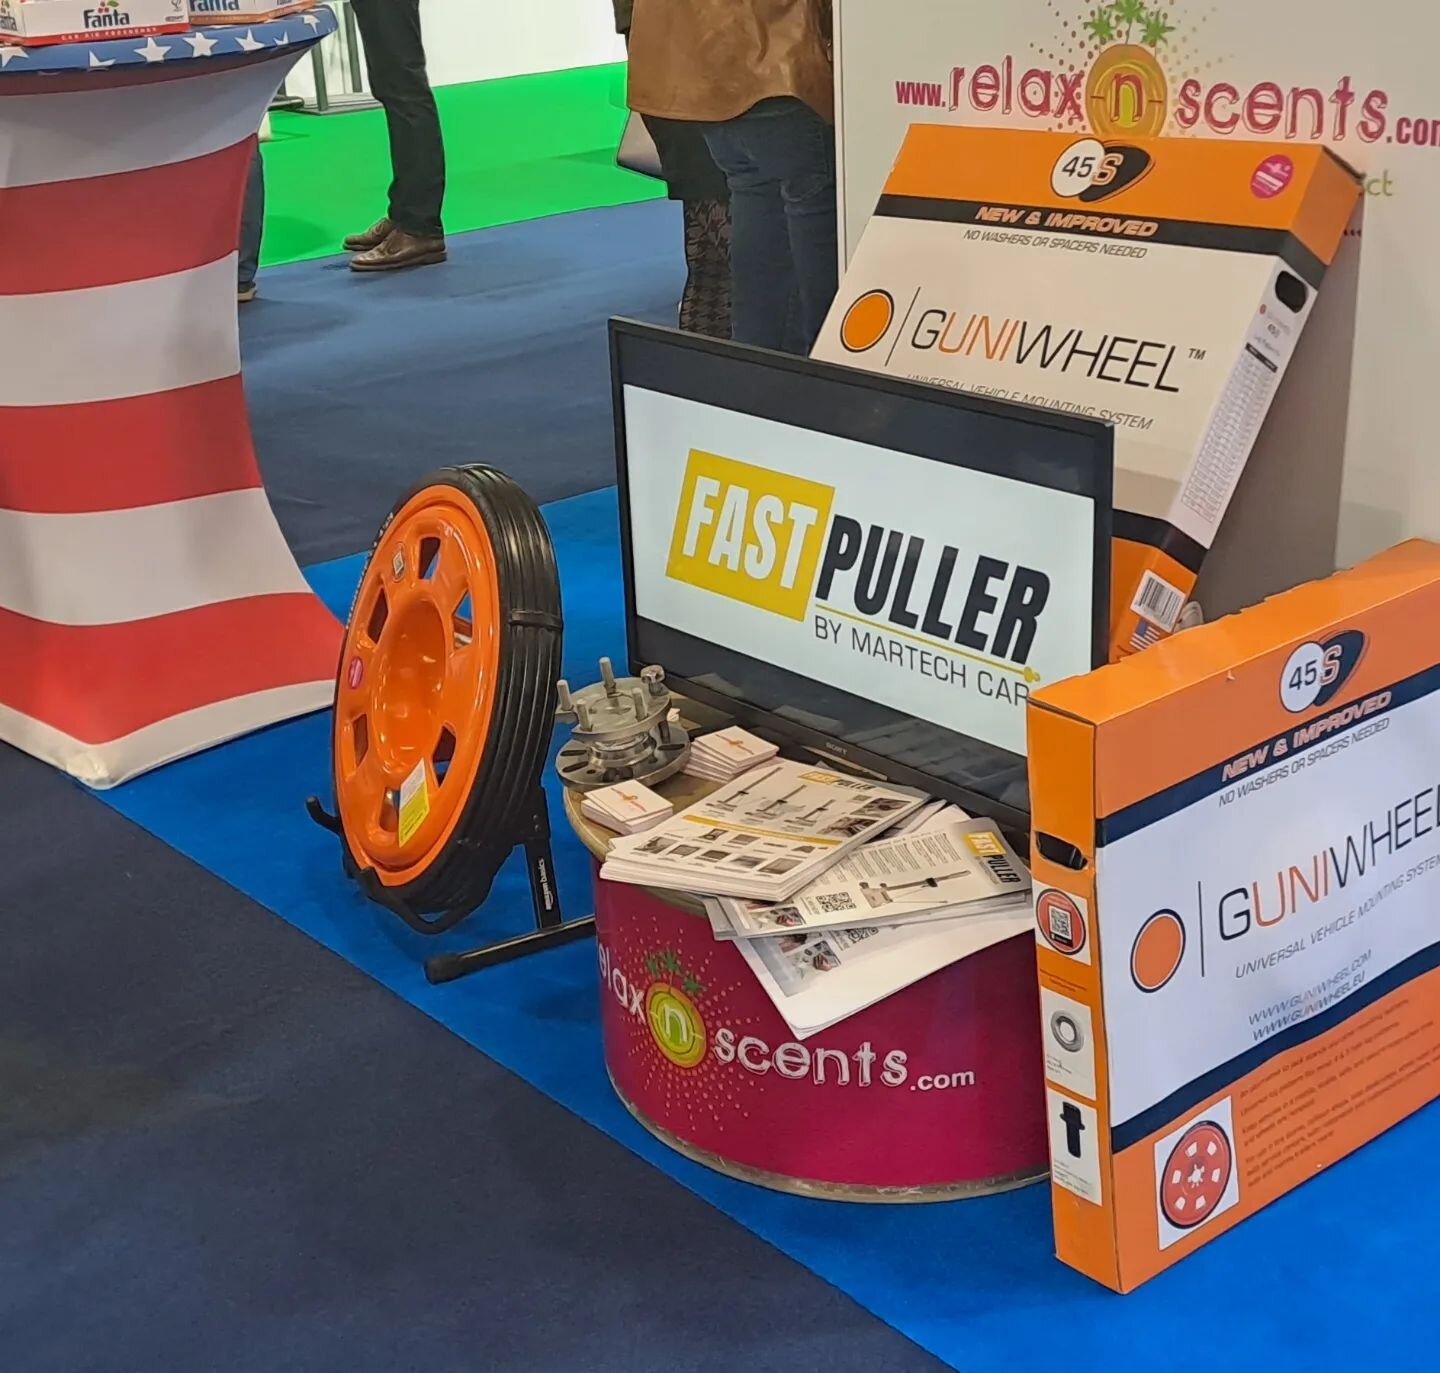 Come to visit us #autotechnicabrussels at Hall 7, @relaxnscents booth. We are waiting you! 🤗

#GUNIWHEEL #guniwheeleurope #tradeshow #brussel #bodyshop #workshop